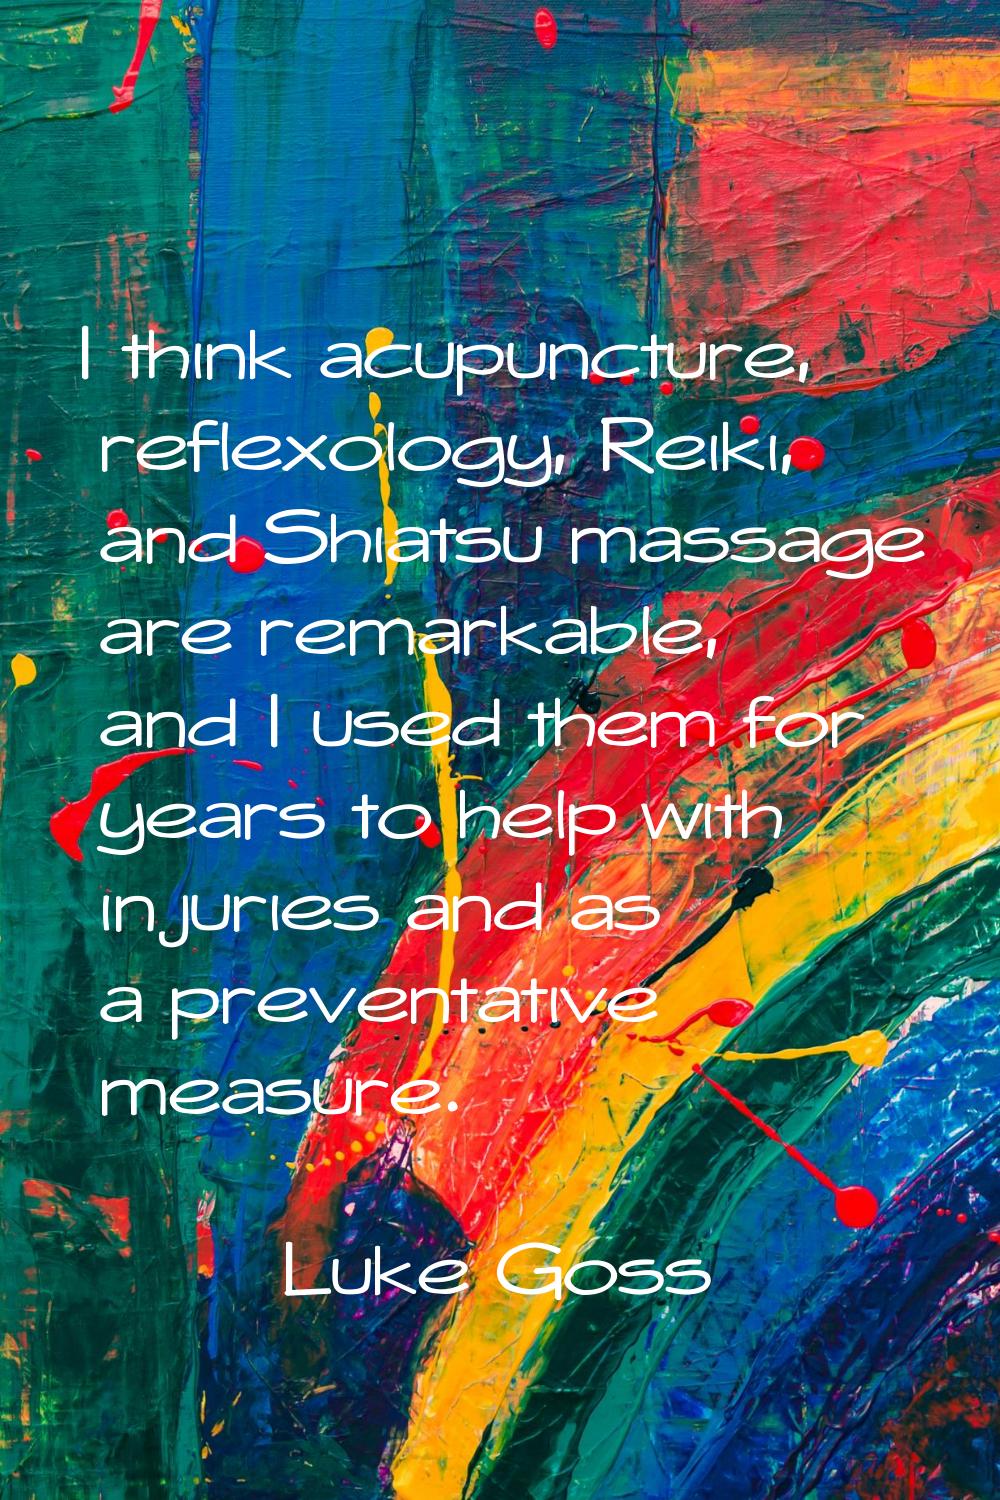 I think acupuncture, reflexology, Reiki, and Shiatsu massage are remarkable, and I used them for ye